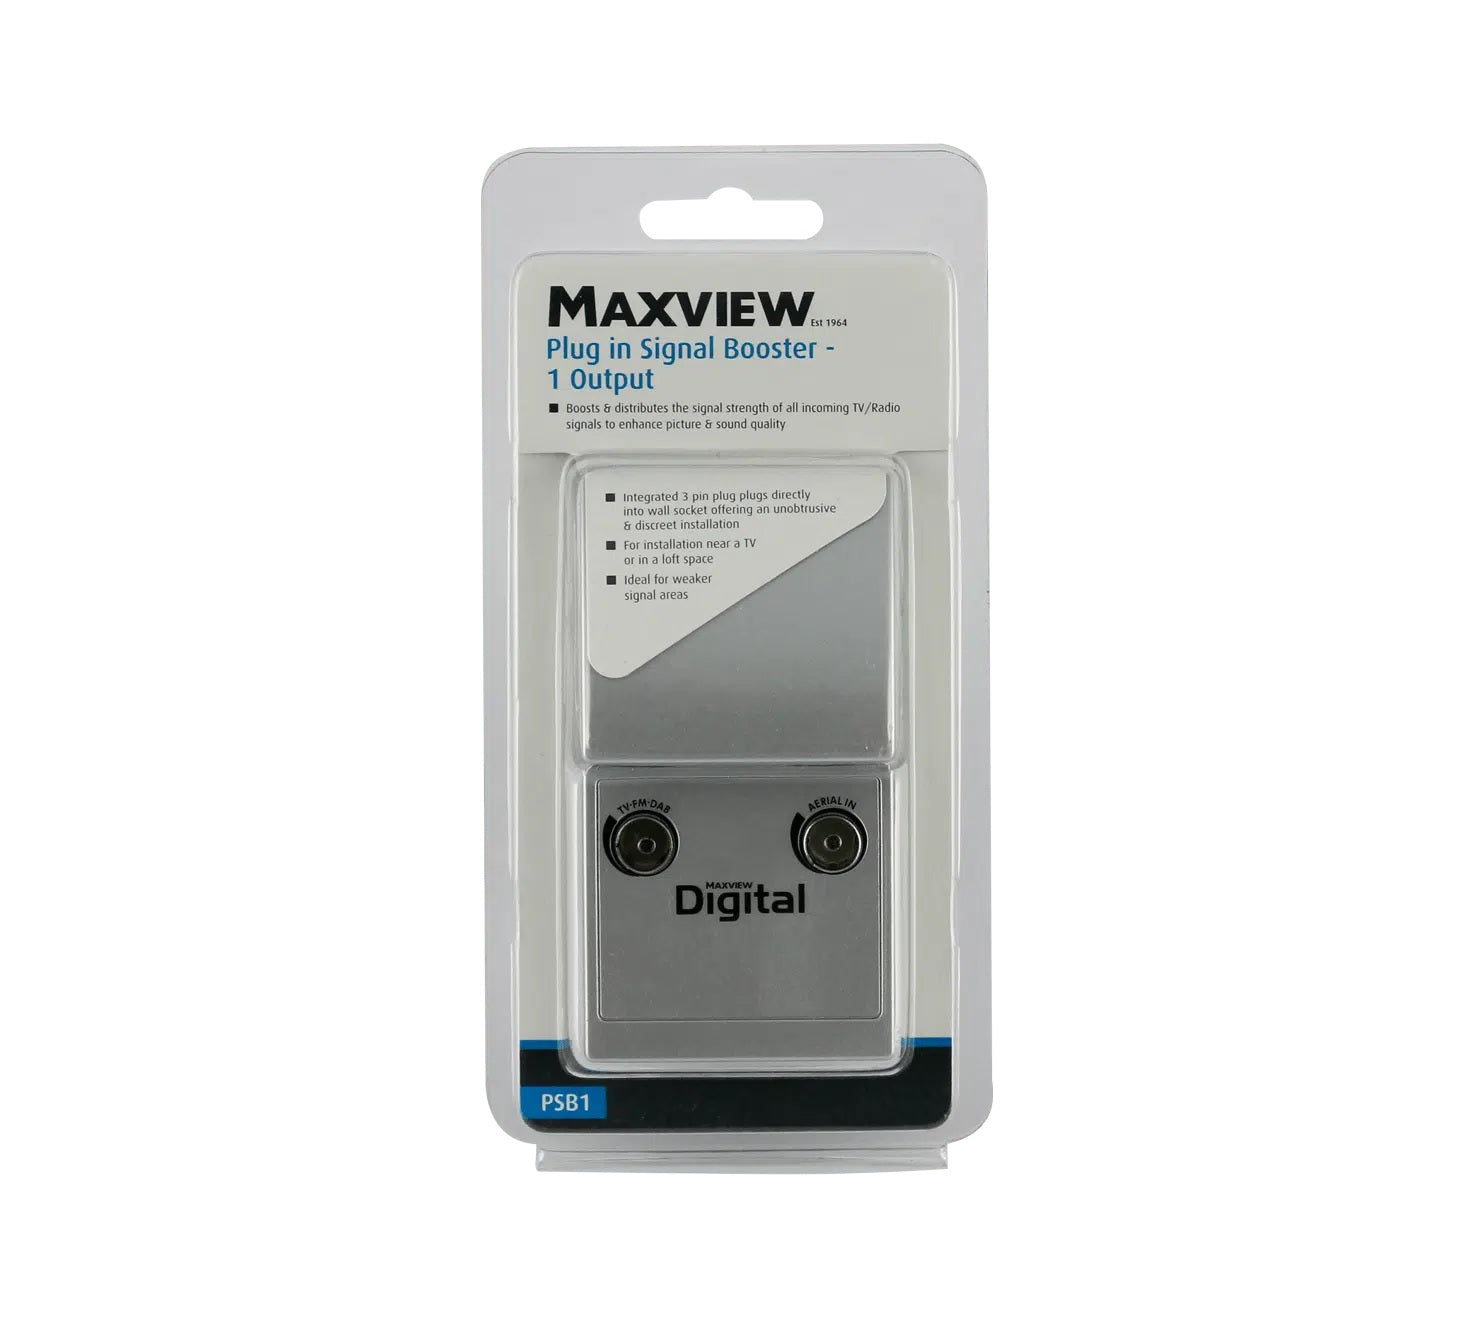 Maxview 240V Signal Booster